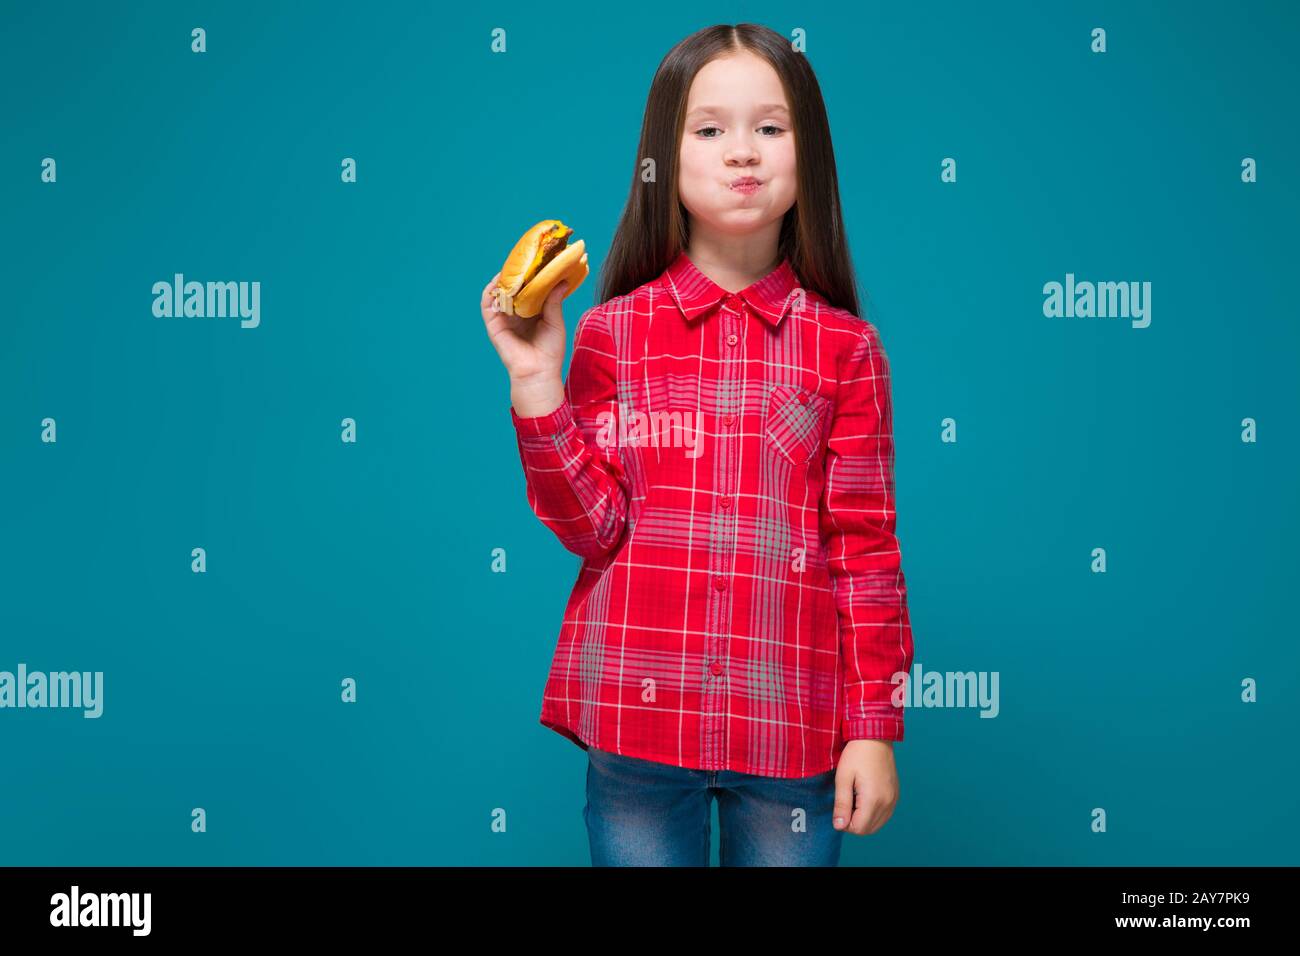 Cute little girl in checkered shirt with brunet hair hold burger Stock Photo